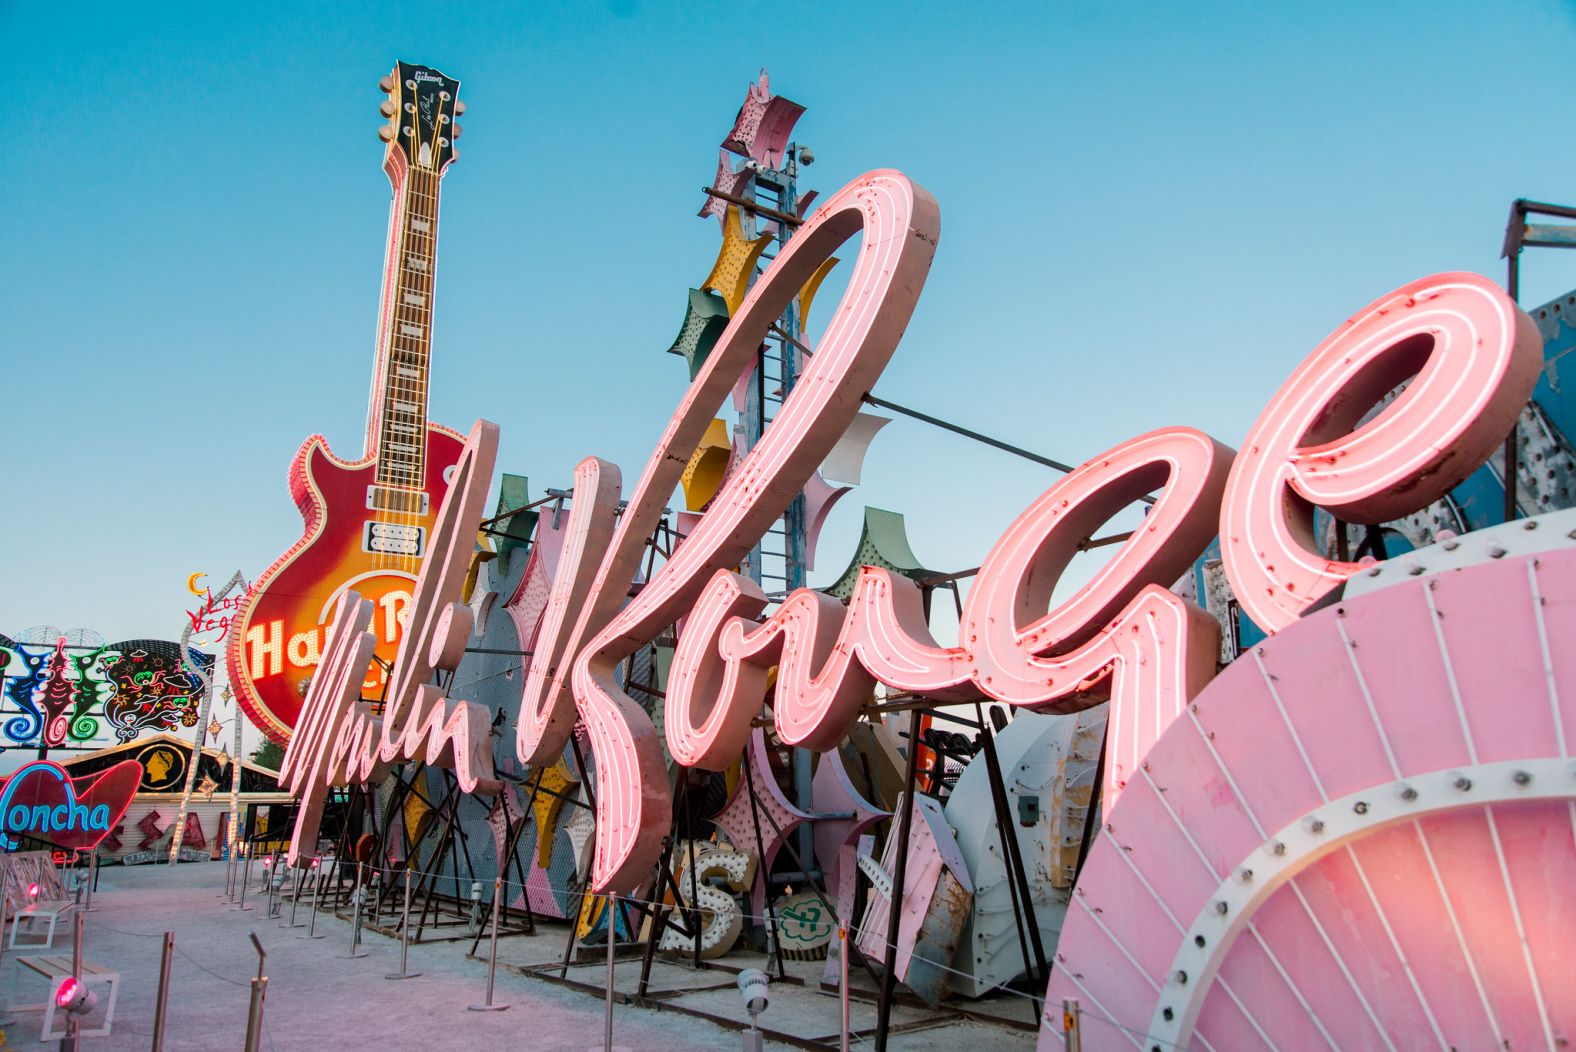 The Moulin Rouge sign is re-illuminated during a private event at The Neon Museum Boneyard in 2020. The Moulin Rouge hotel and casino closed in October 1955 after only six months of operation. It was themed after the Moulin Rouge in Paris and was the first hotel casino in Las Vegas to be desegregated. It also had the first line of Black dancers. 